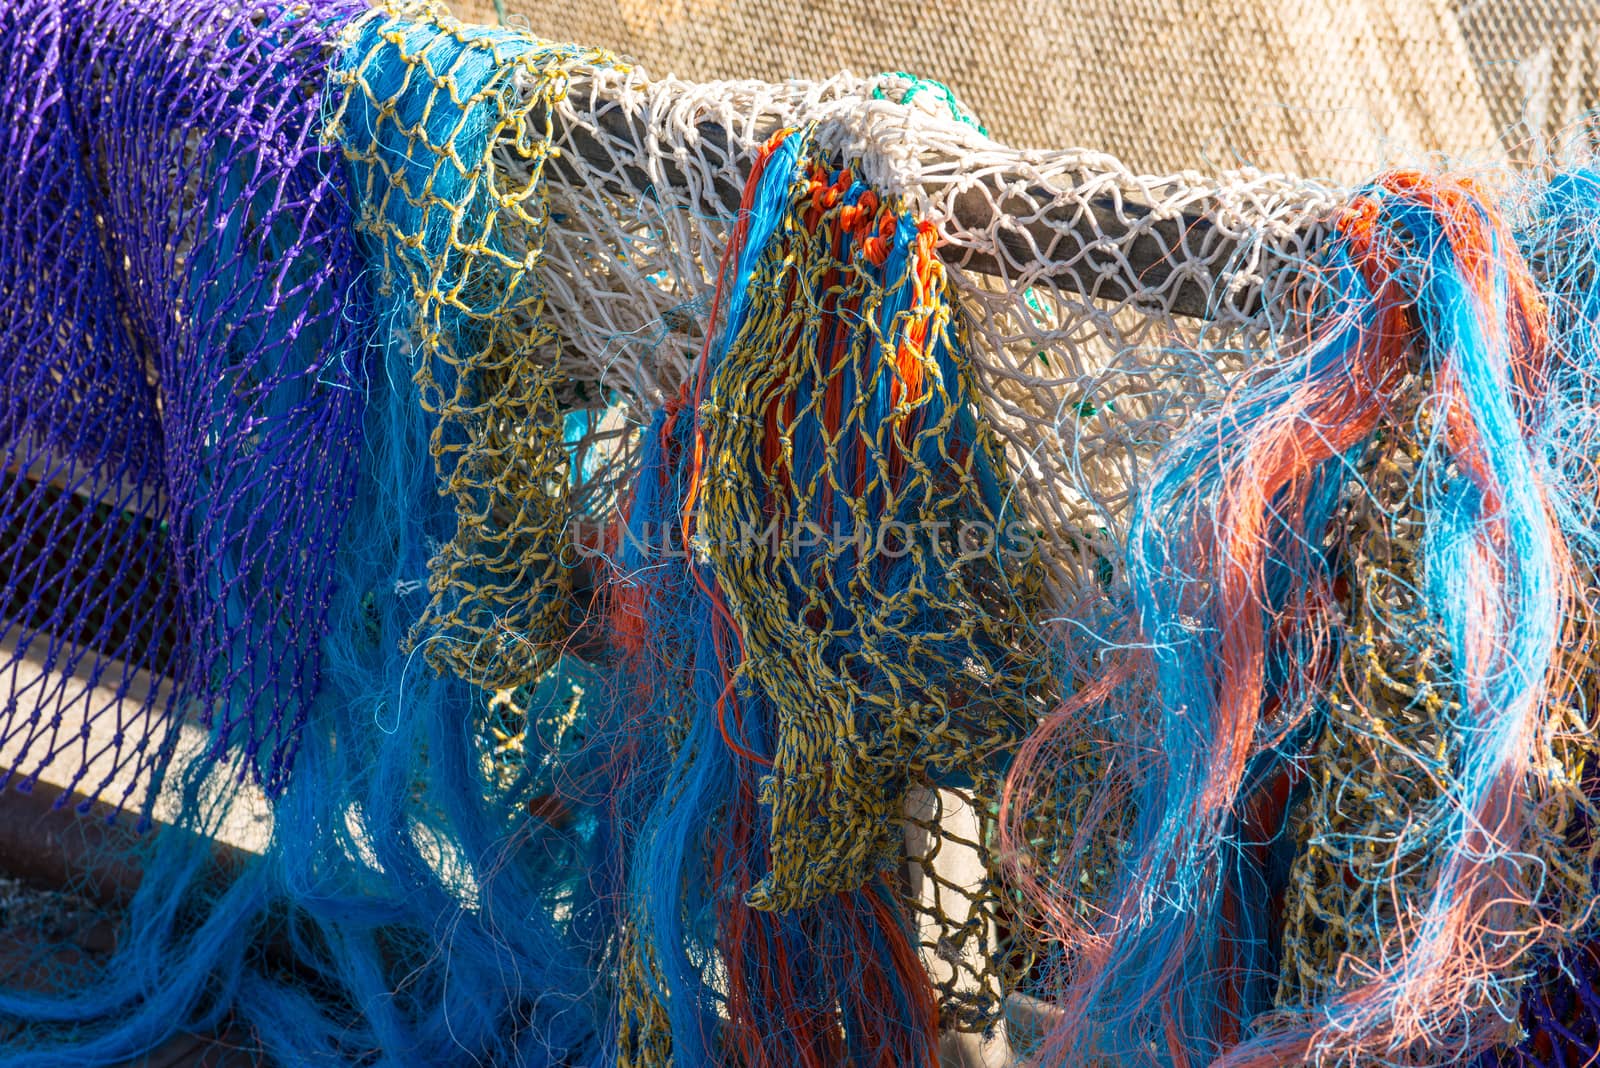 Colored fishing nets in a Dutch fishing port
 by Tofotografie